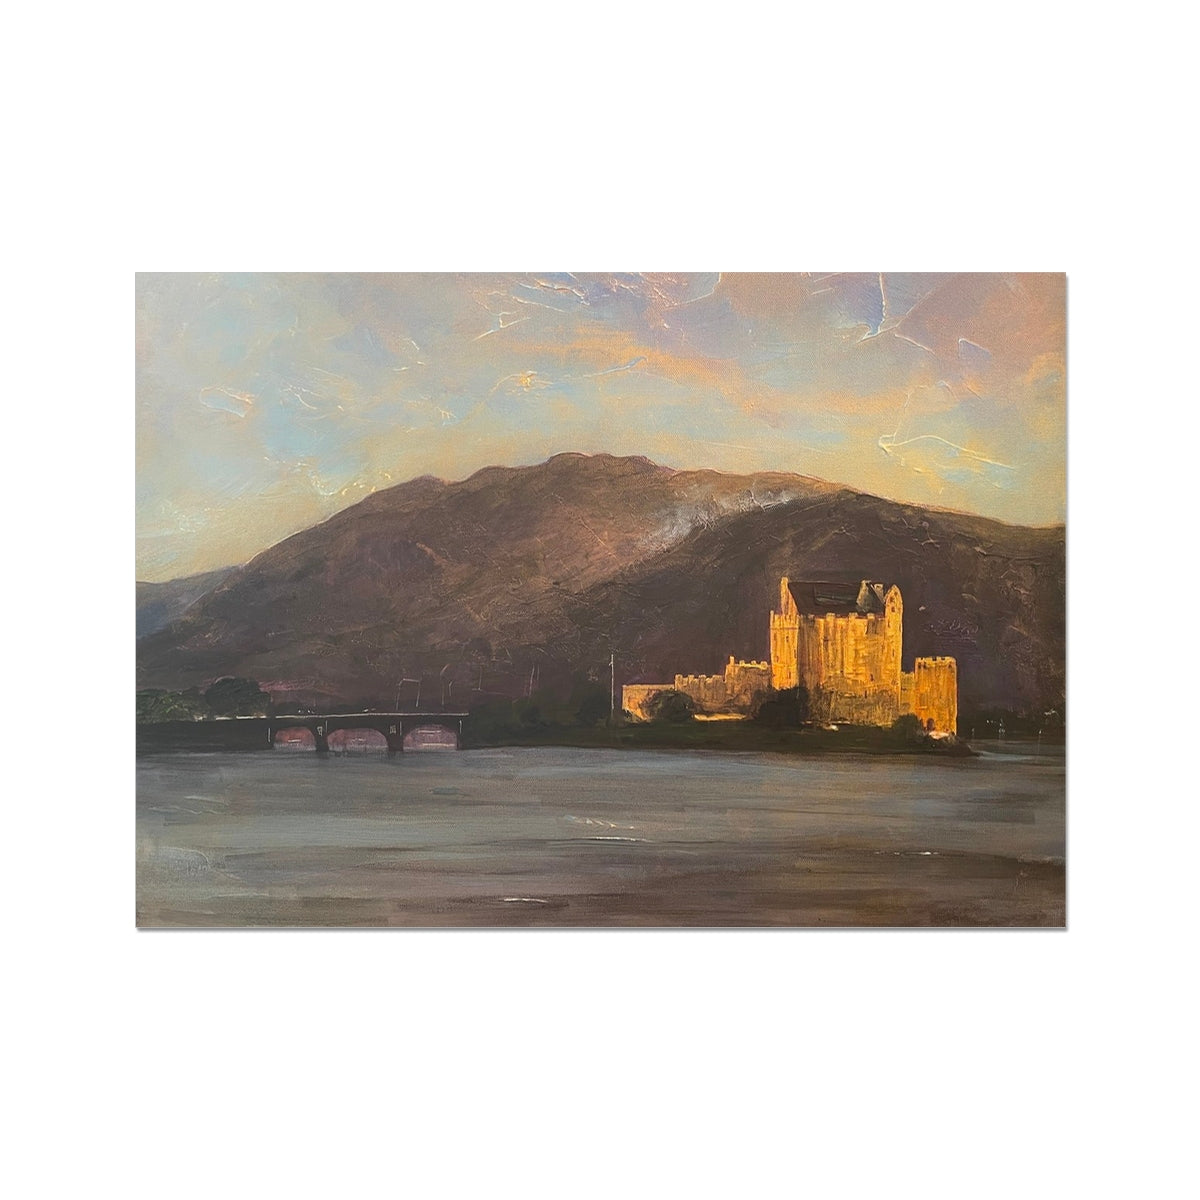 Eilean Donan Castle Painting | Fine Art Prints From Scotland-Unframed Prints-Historic & Iconic Scotland Art Gallery-A2 Landscape-Paintings, Prints, Homeware, Art Gifts From Scotland By Scottish Artist Kevin Hunter